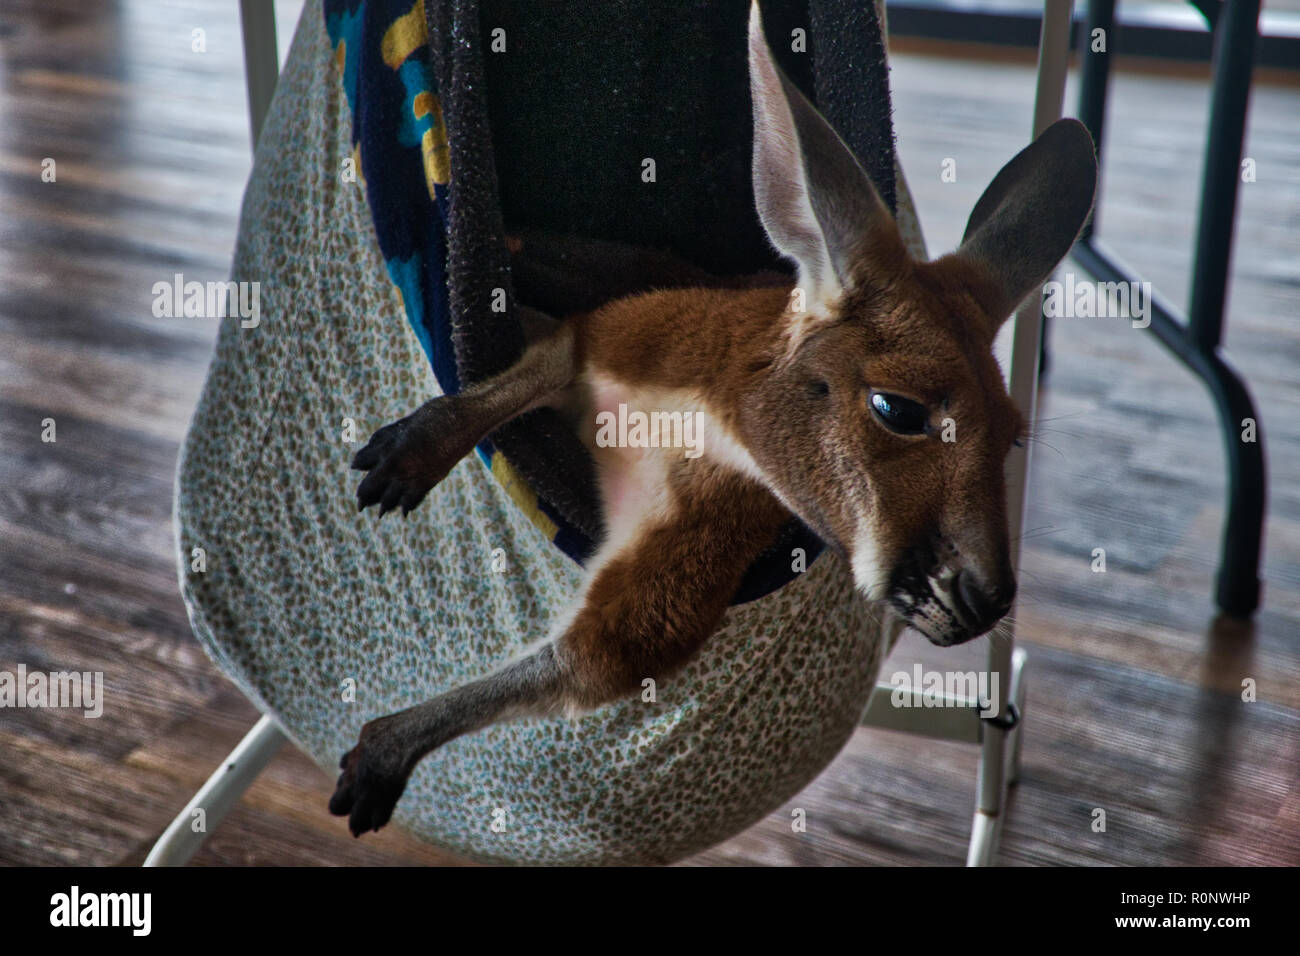 Injured Joey with expressive face - 8 of 8 Stock Photo